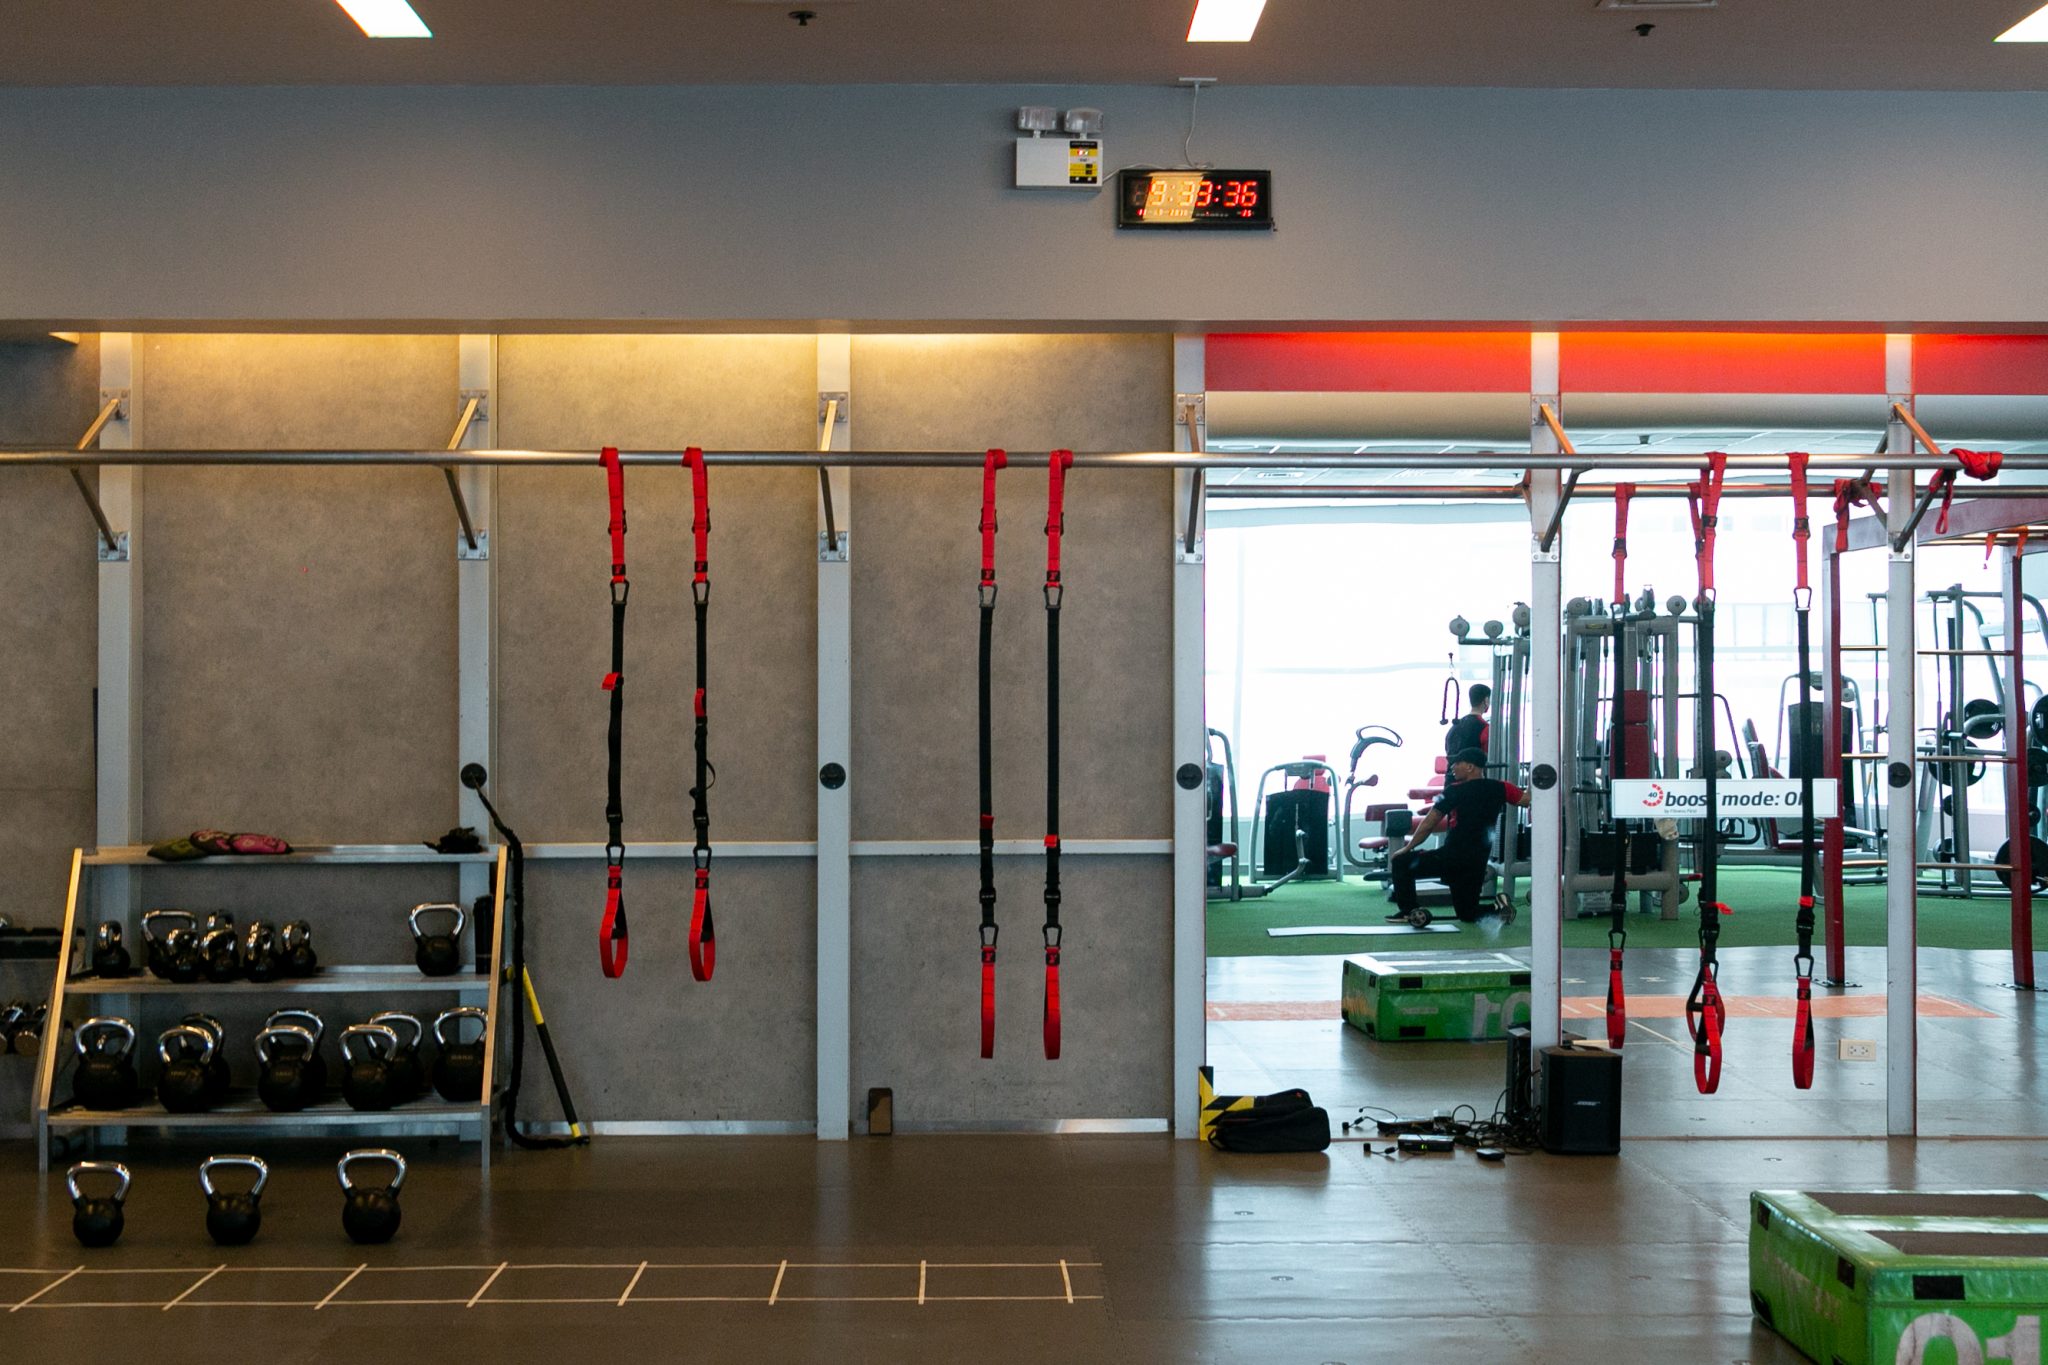 The Spartan group workout setup includes kettlebells, suspended row straps, and a plyo box